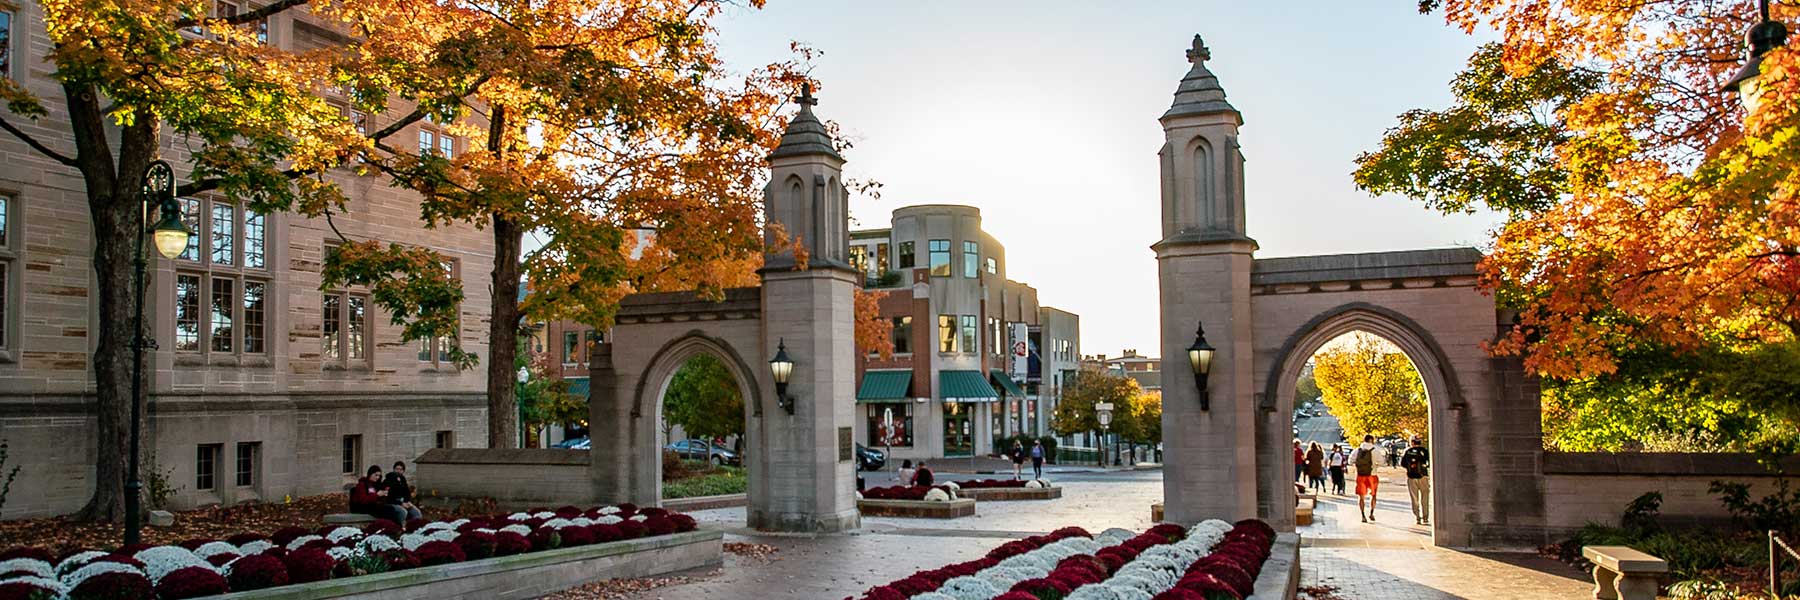 Sample Gates in the fall.